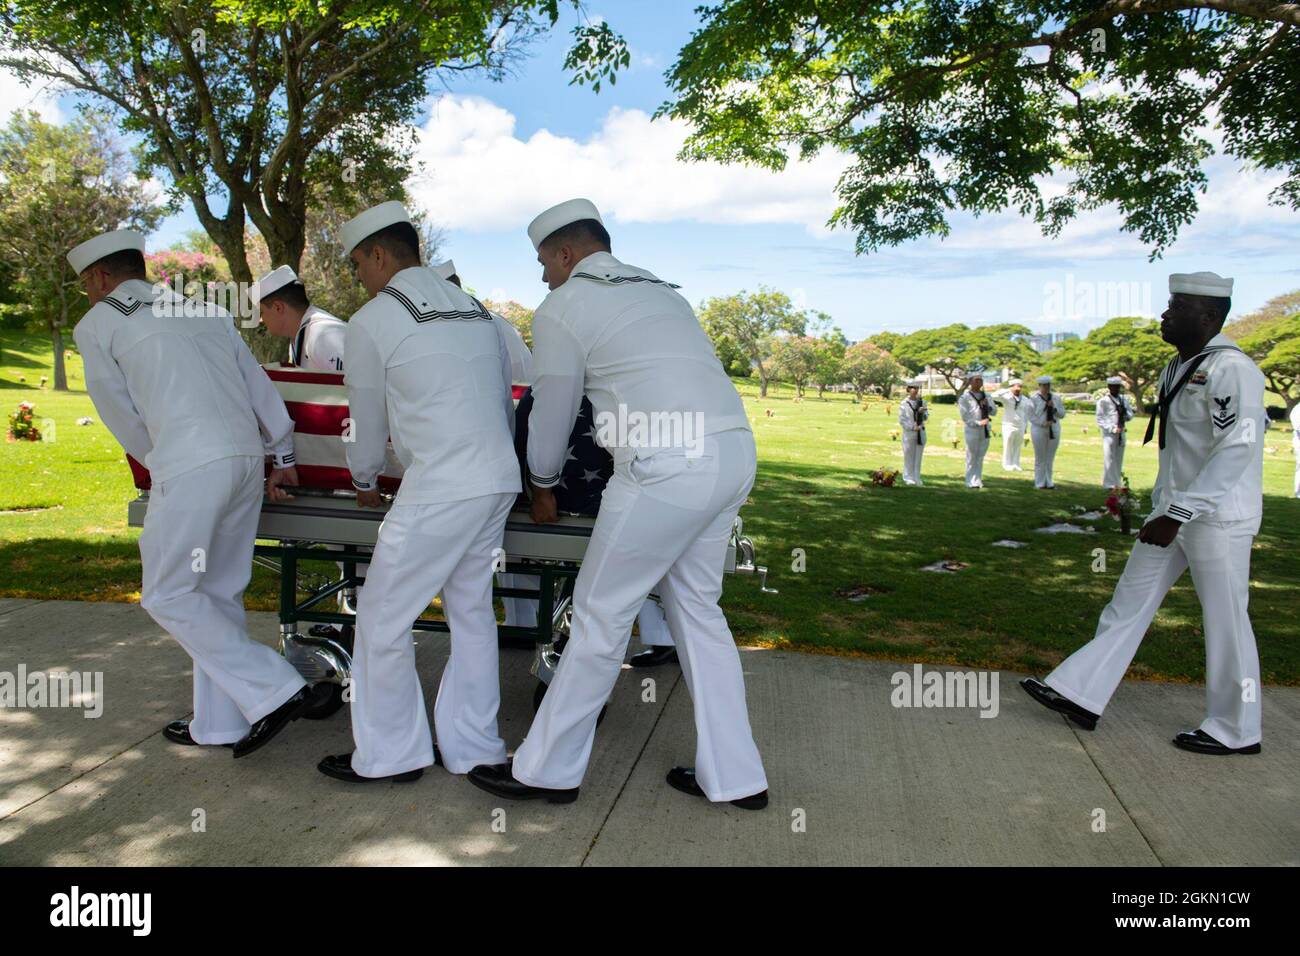 Sailors assigned to Navy Region Hawaii and the Defense POW/MIA Accounting Agency (DPAA) conduct a funeral for U.S. Navy Gunner’s Mate 3rd Class Shelby Treadway, 25, of Manchester, Kentucky, at the National Memorial Cemetery of the Pacific, Honolulu, Hawaii, June 2, 2021. Treadway was assigned to the USS Oklahom,a which sustained fire from Japanese aircraft and multiple torpedo hits causing the ship to capsize and resulted in the deaths of more than 400 crew members on Dec. 7, 1941, at Ford Island, Pearl Harbor. Treadway was recently identified through DNA analysis by the DPAA forensic laborato Stock Photo